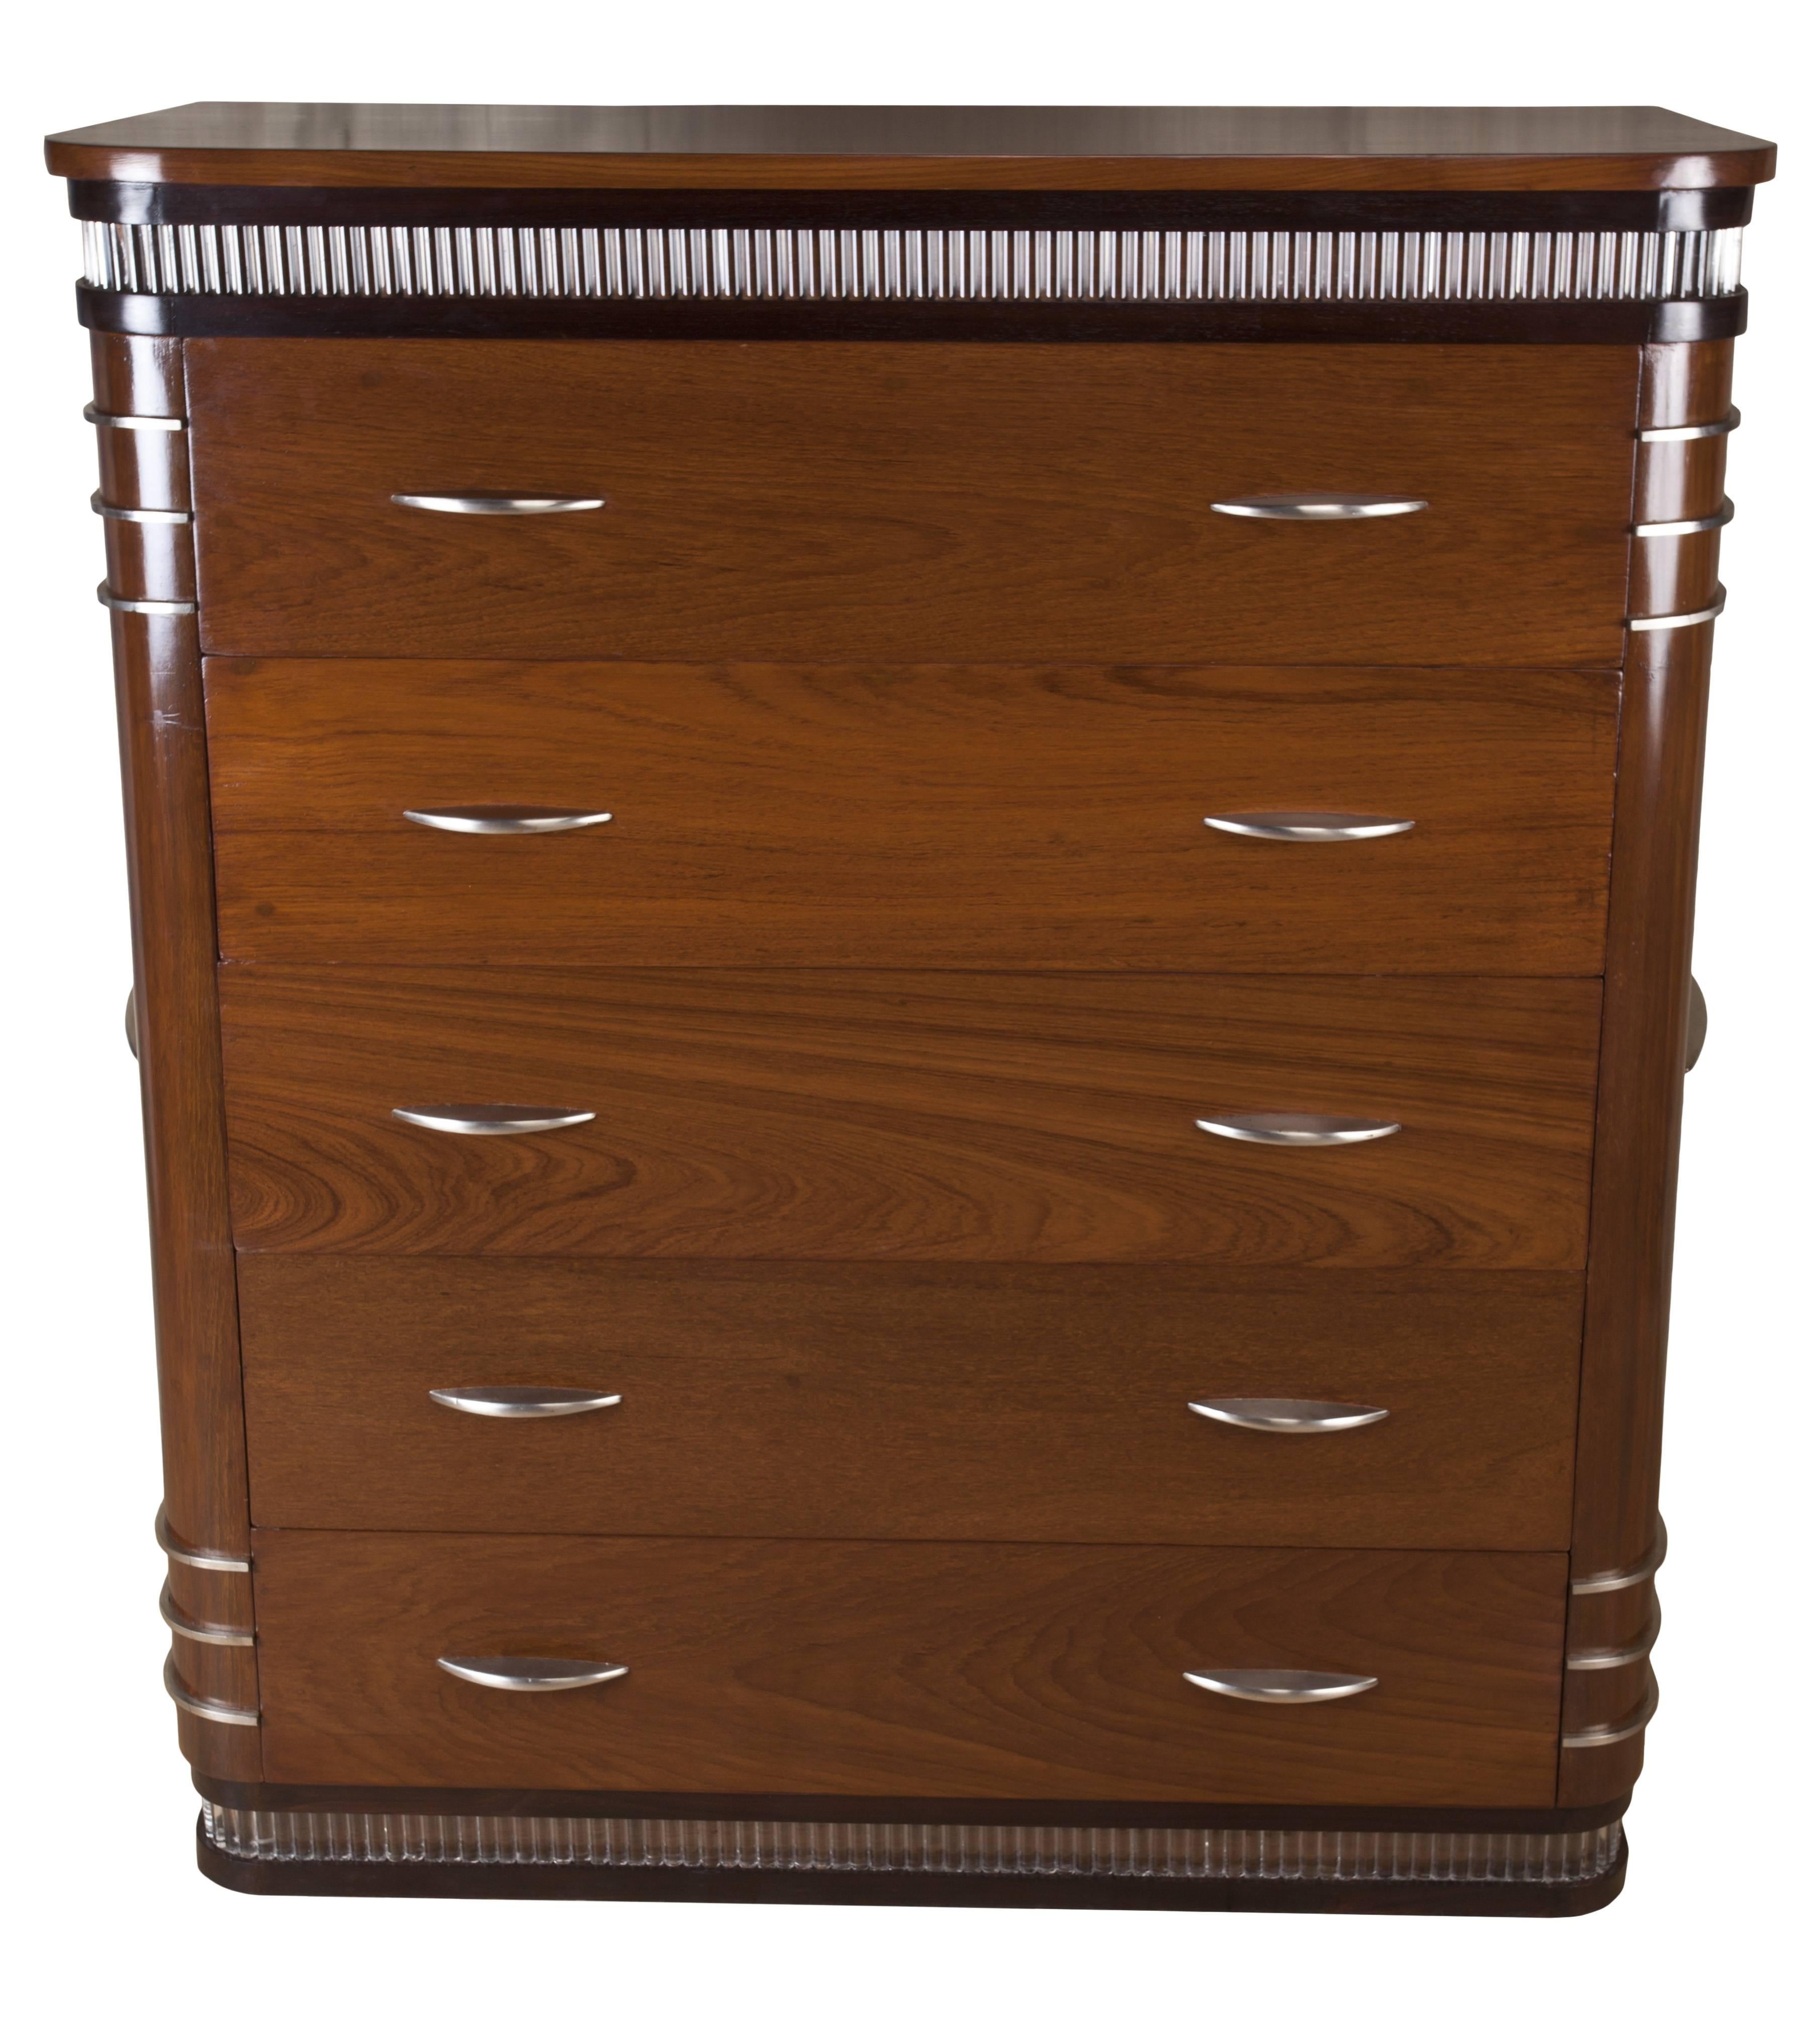 An amazing find, deco period teak chest of drawers with rosewood accents, glass inlay rods at the top and the bottom. Chrome features include drawer pulls, side detailing and handles. Rare and handsome.